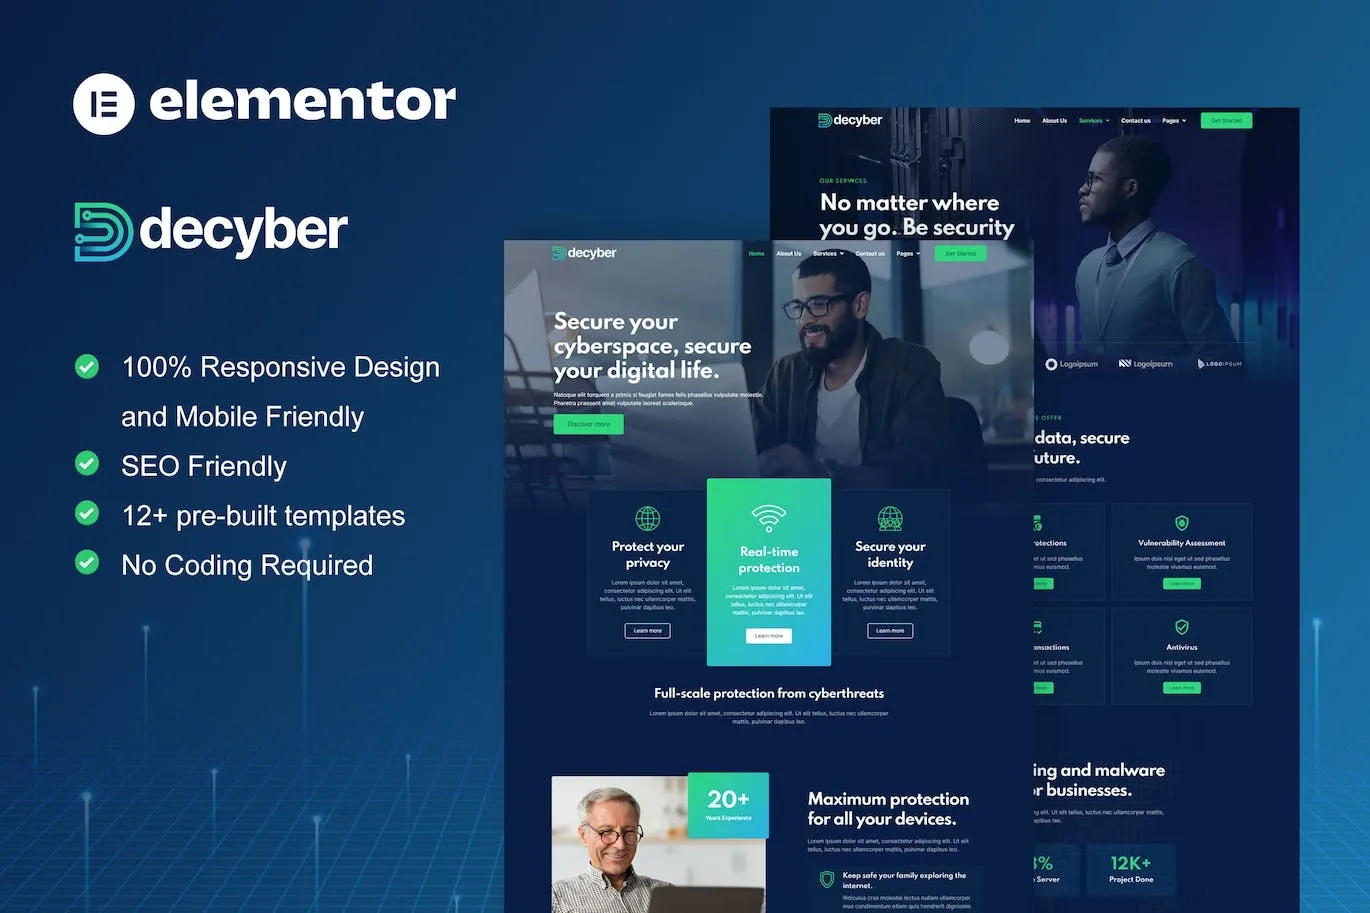 Decyber Cyber Security Services Elementor Template Kit 85 1697638260 1